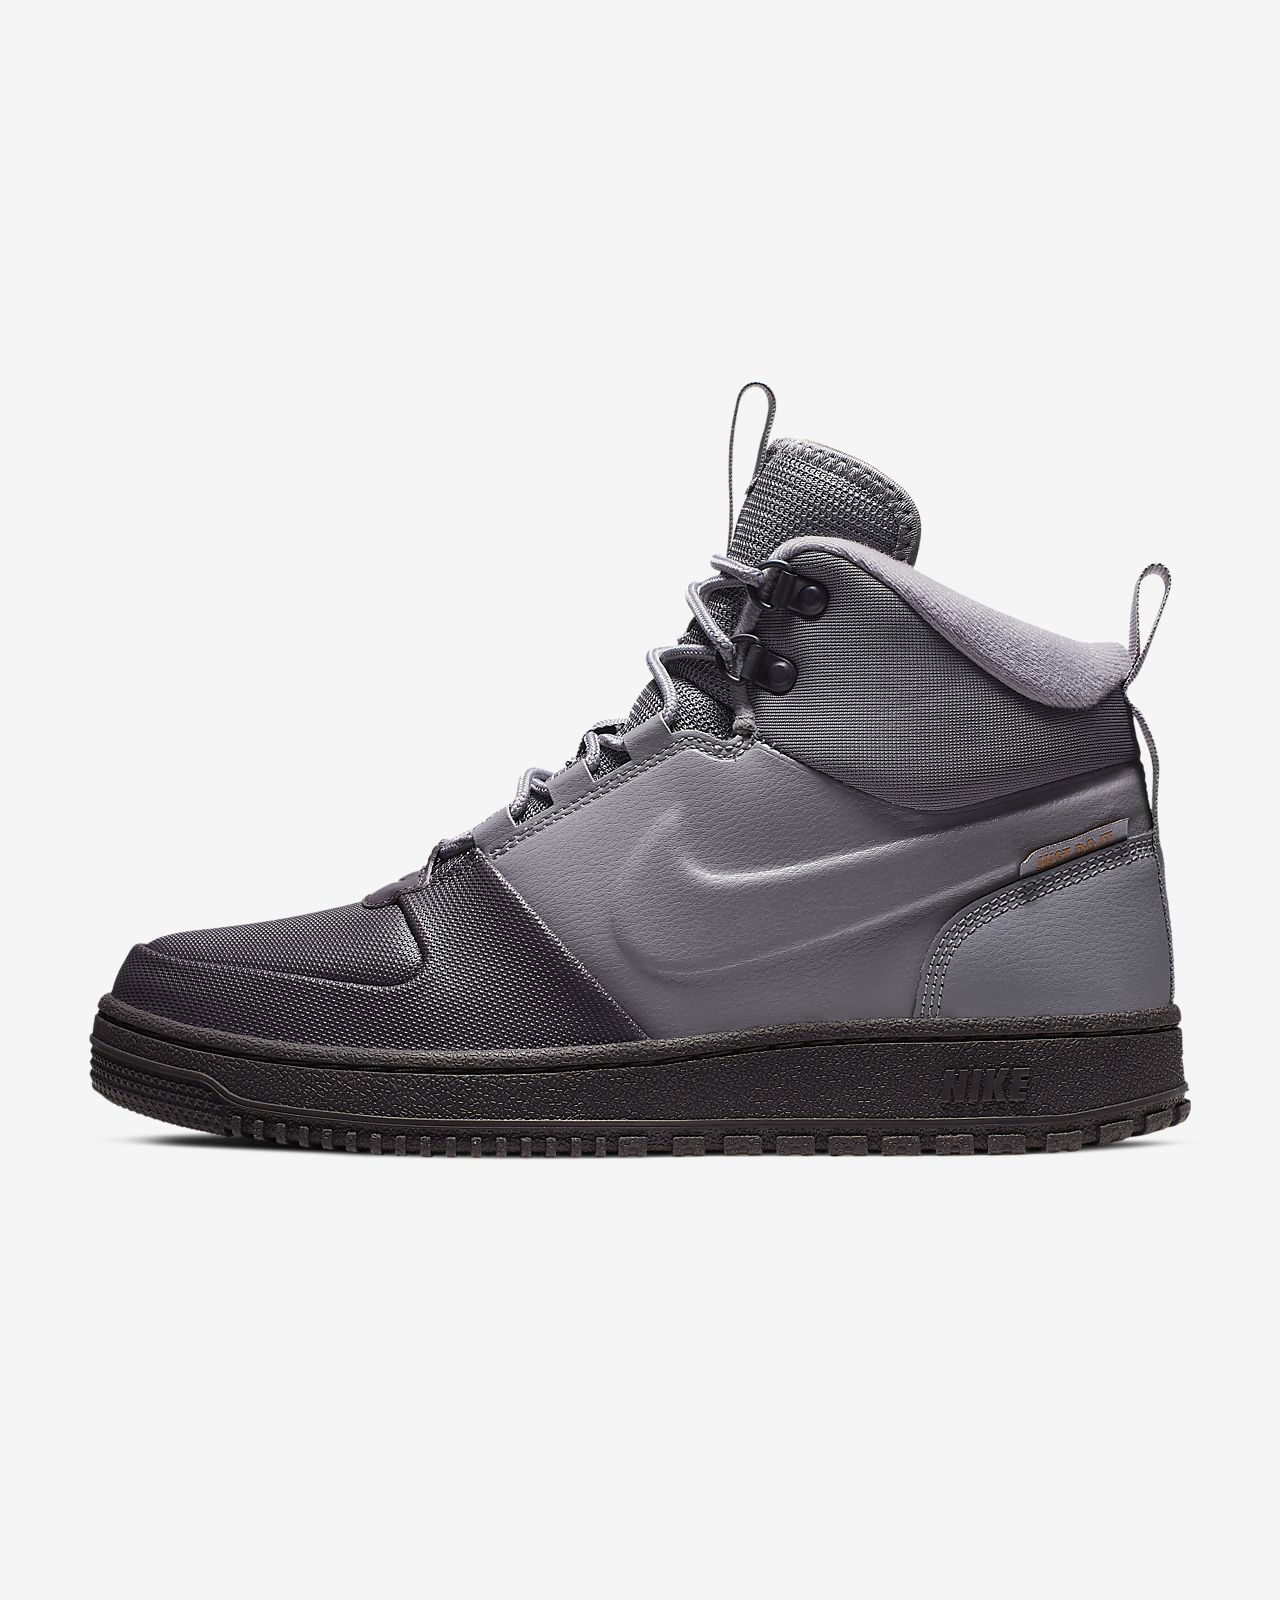 nike path winter boots